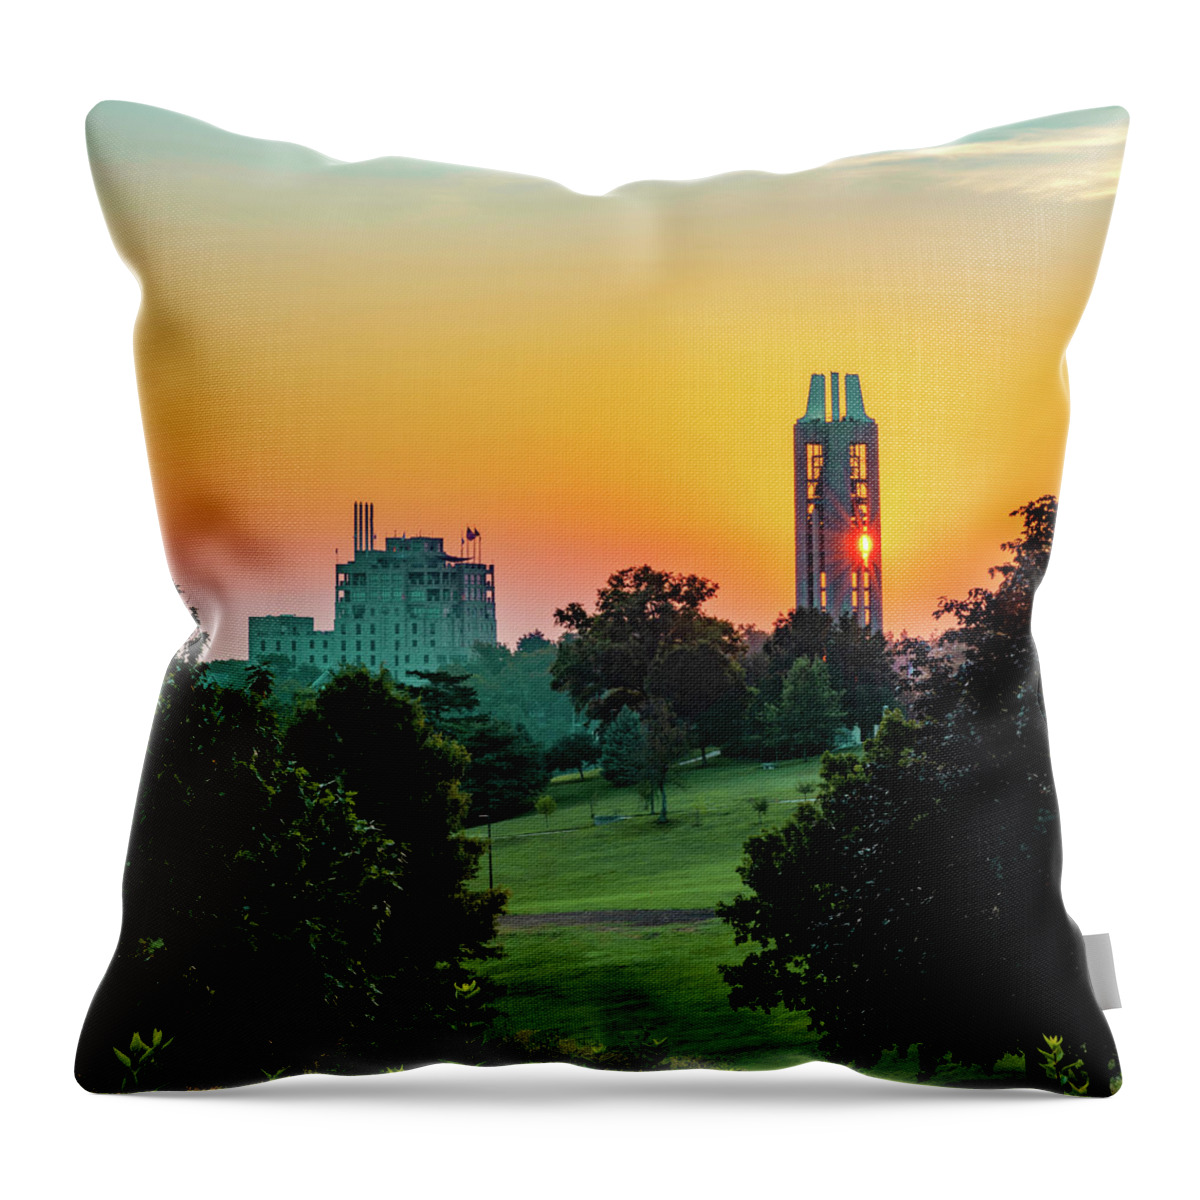 University Of Kansas Throw Pillow featuring the photograph Kansas University Campanile and Mt. Oread Over Kaw Valley Sunrise by Gregory Ballos